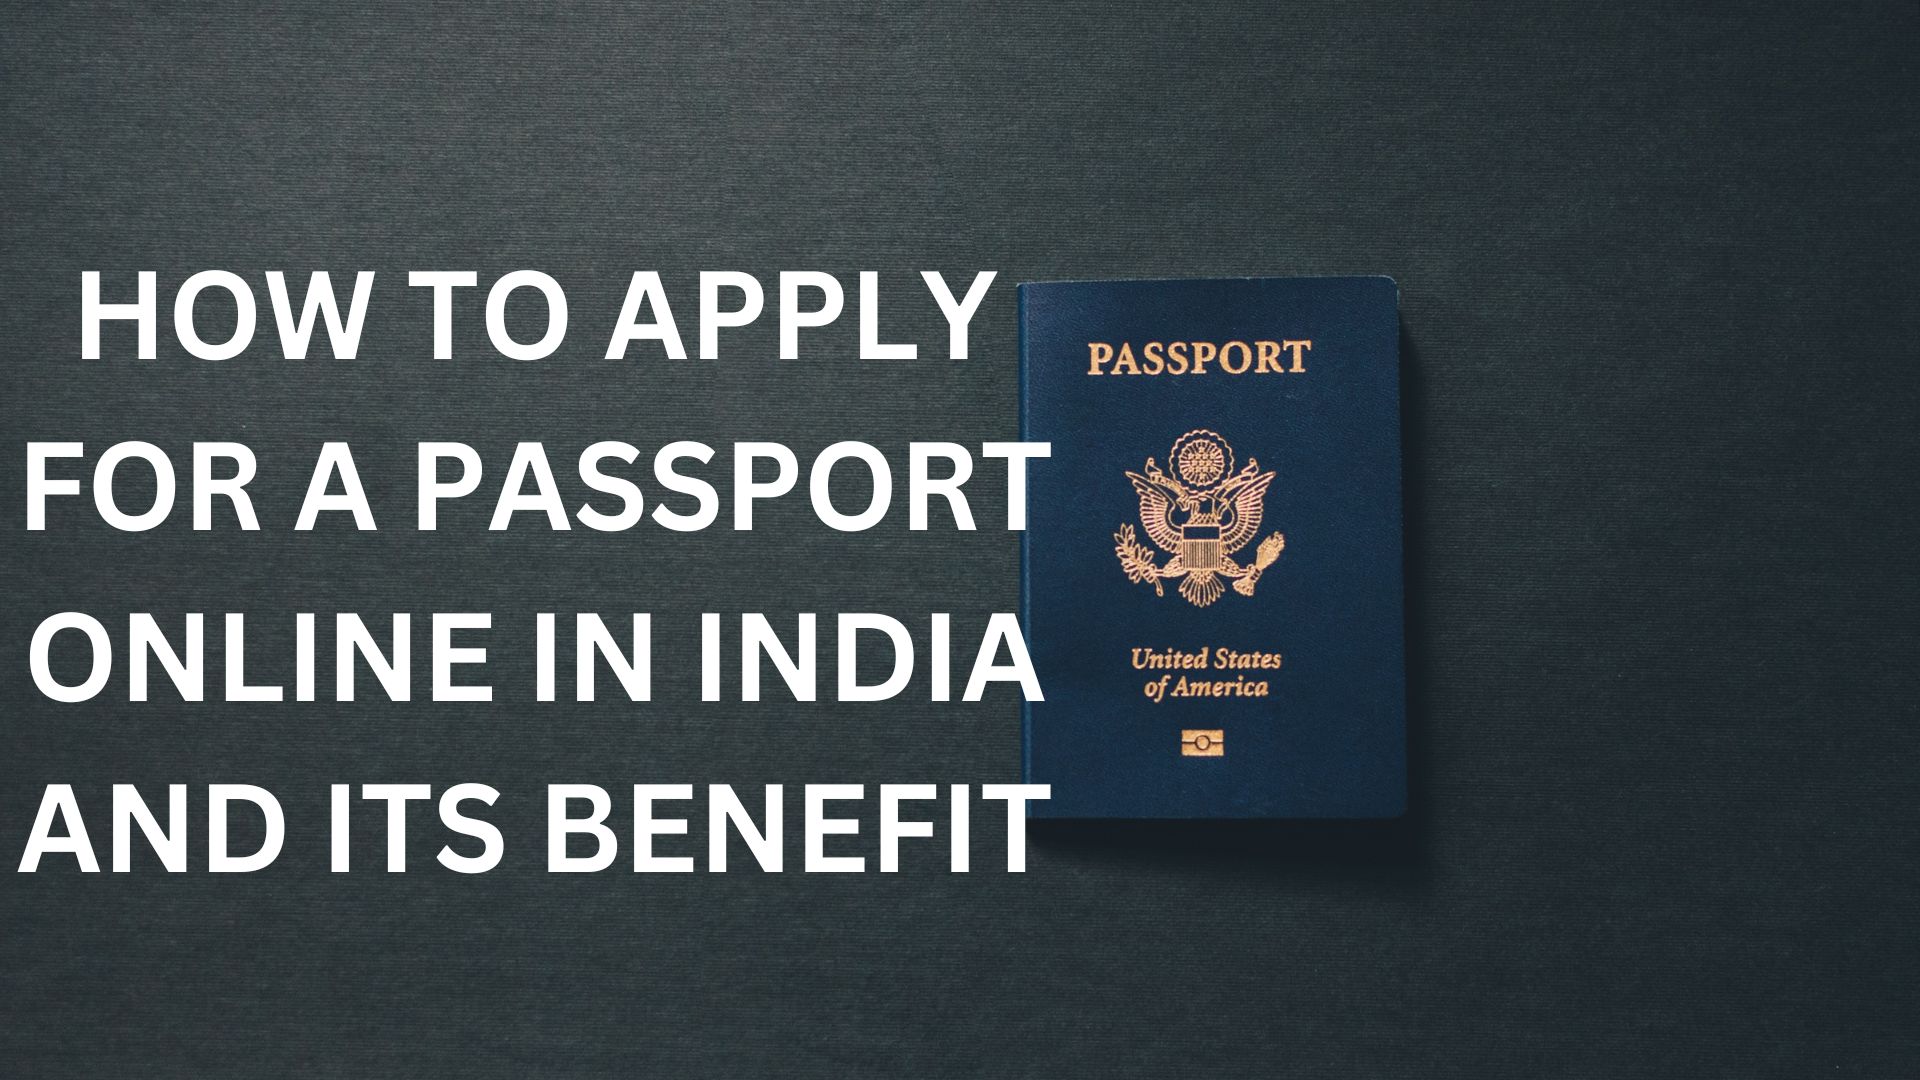 HOW TO APPLY FOR A PASSPORT ONLINE IN INDIA AND ITS BENEFIT